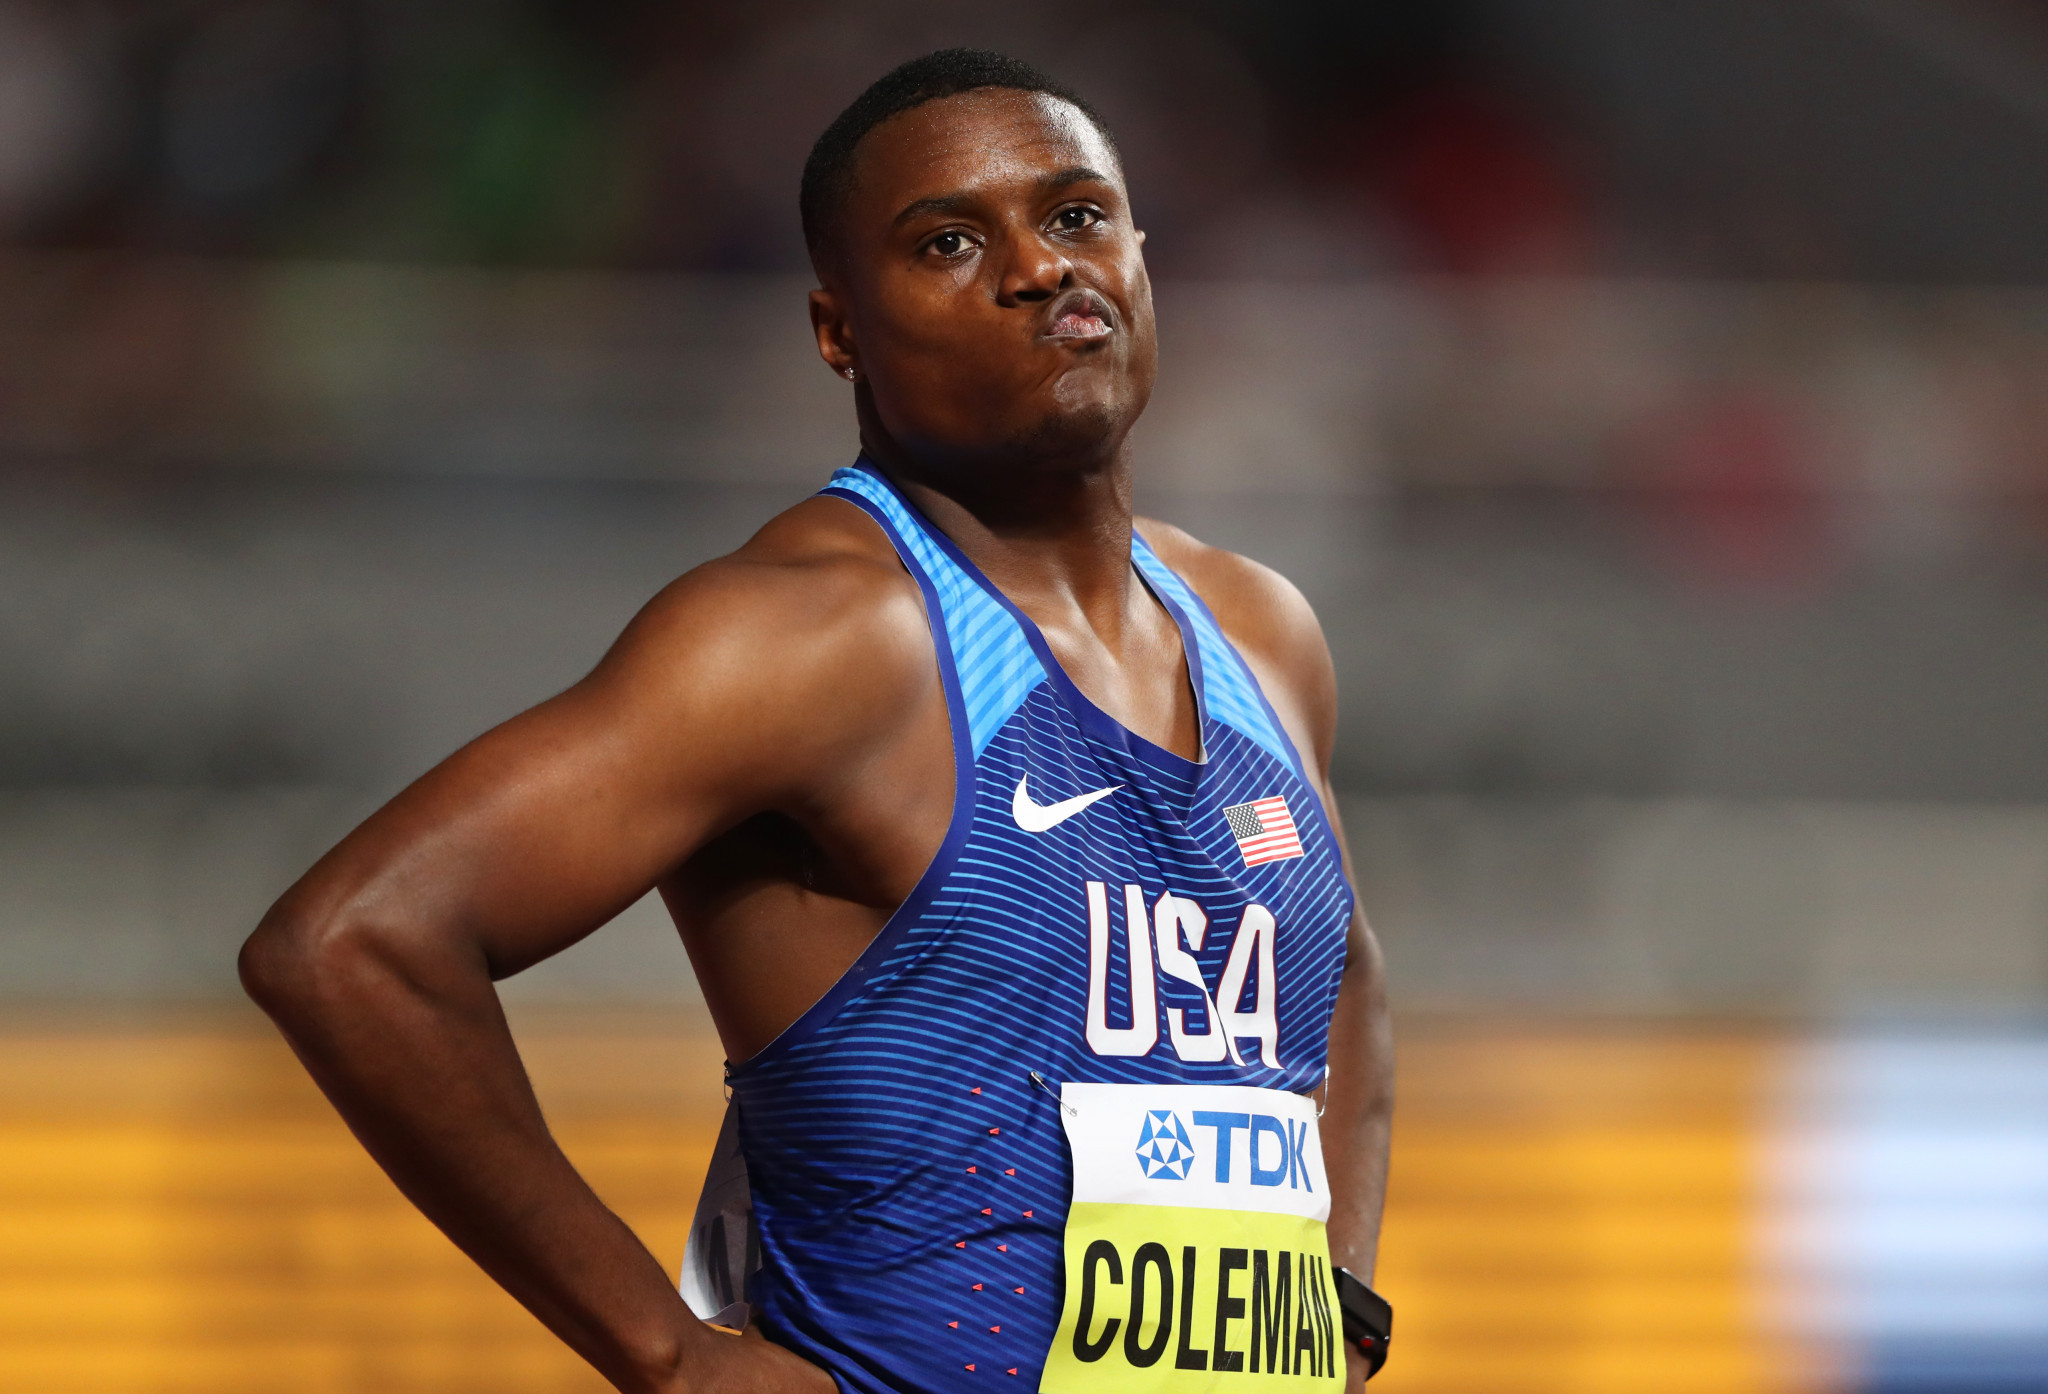 Christian Coleman, the reigning men's 100m world champion, was given a two-year doping ban in this disappointing year for athletics ©Getty Images